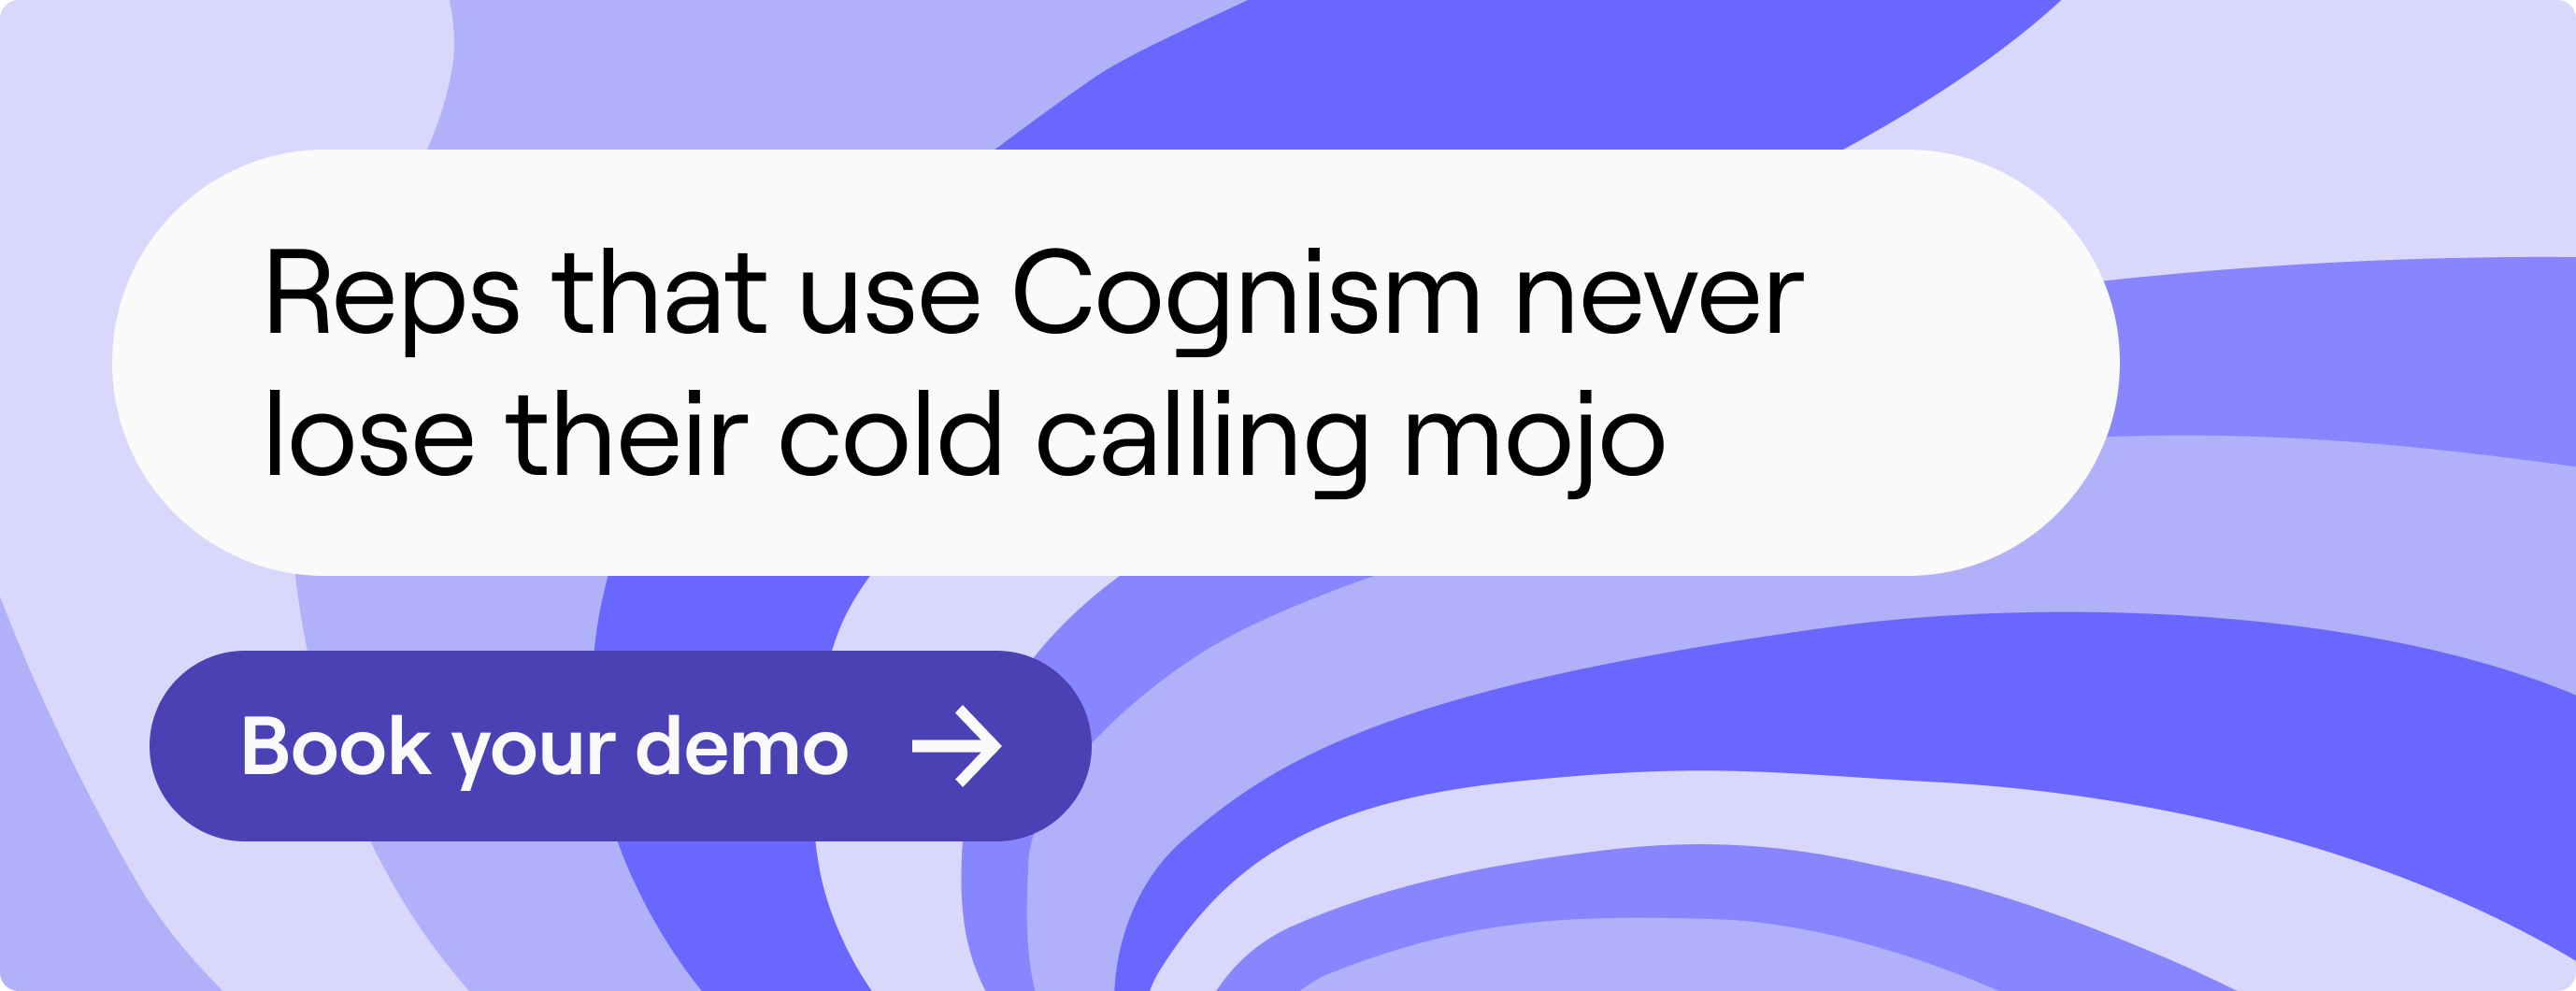 Reps that use Cognism never lose their cold calling mojo